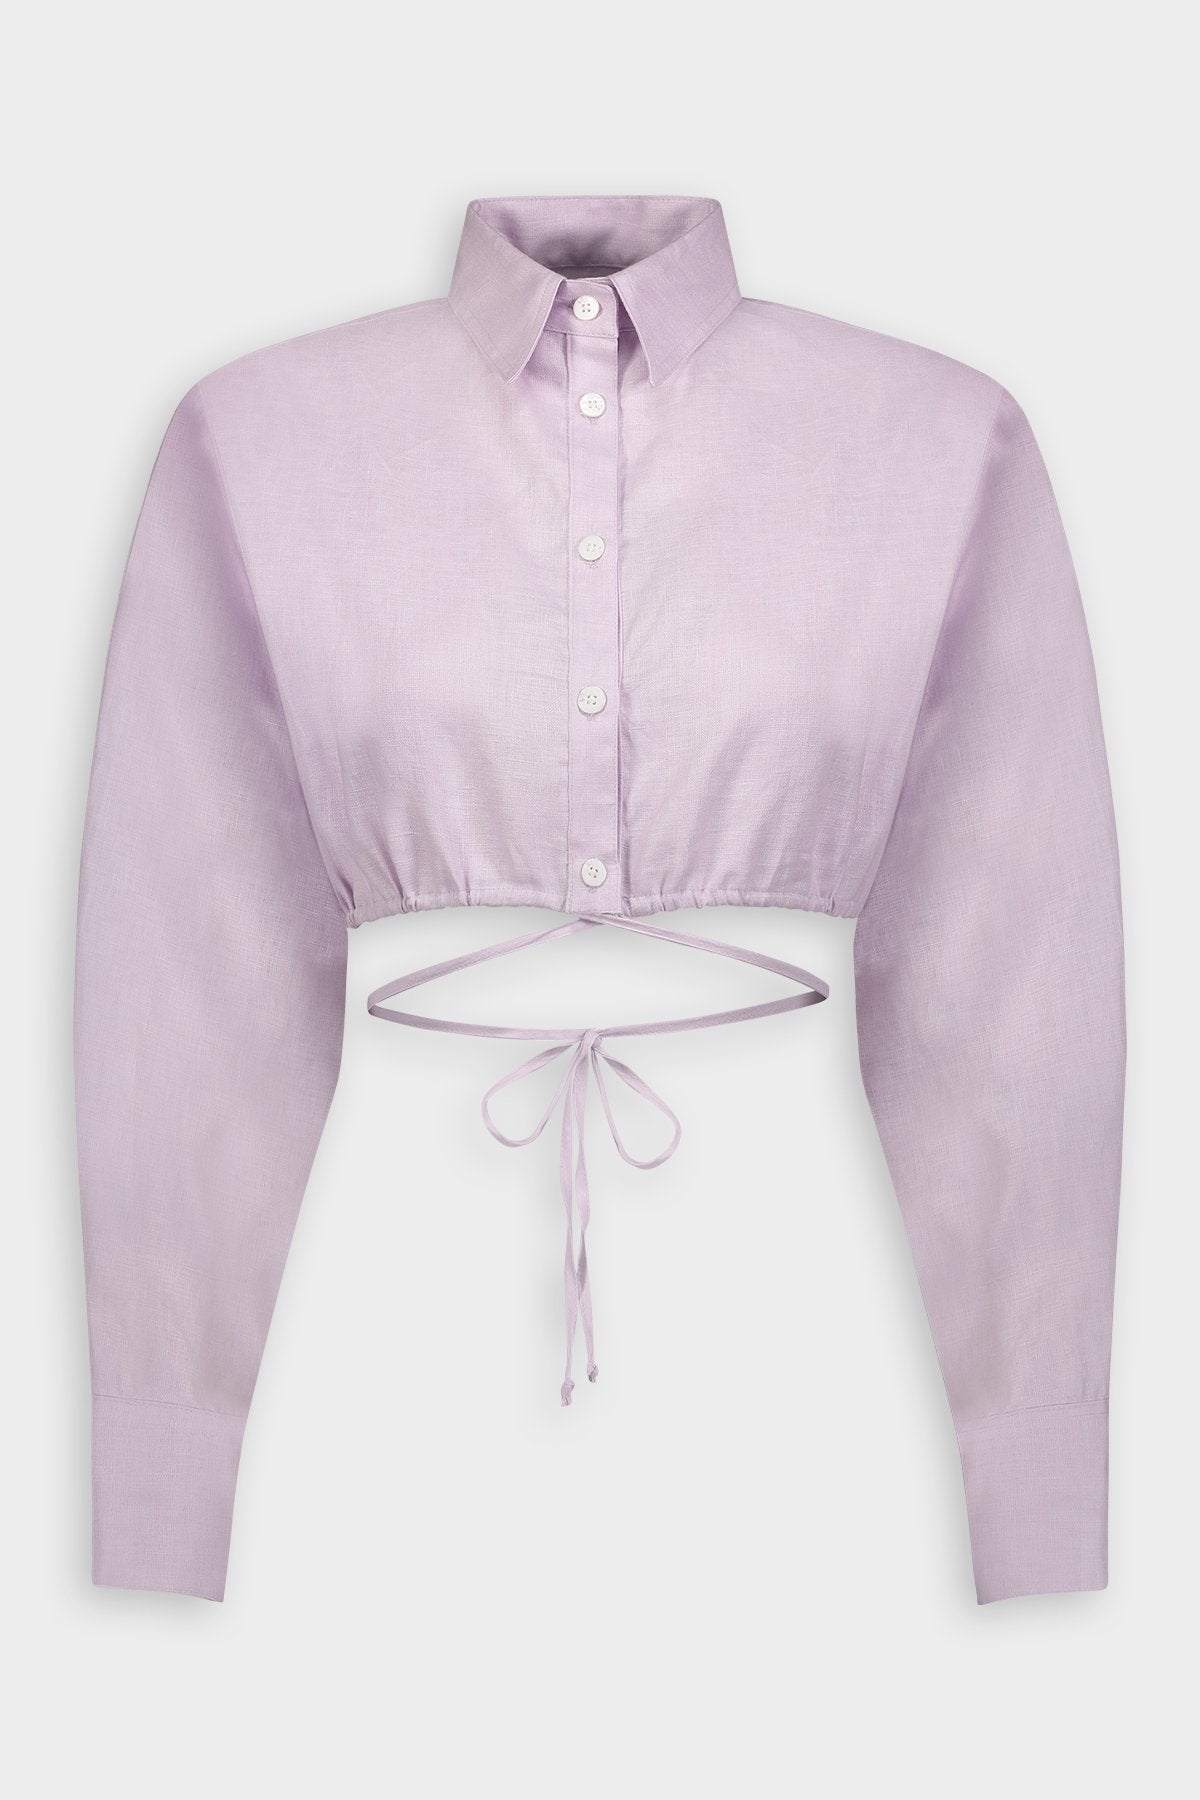 Long Sleeve Cropped Button Up in Lavender - shop-olivia.com